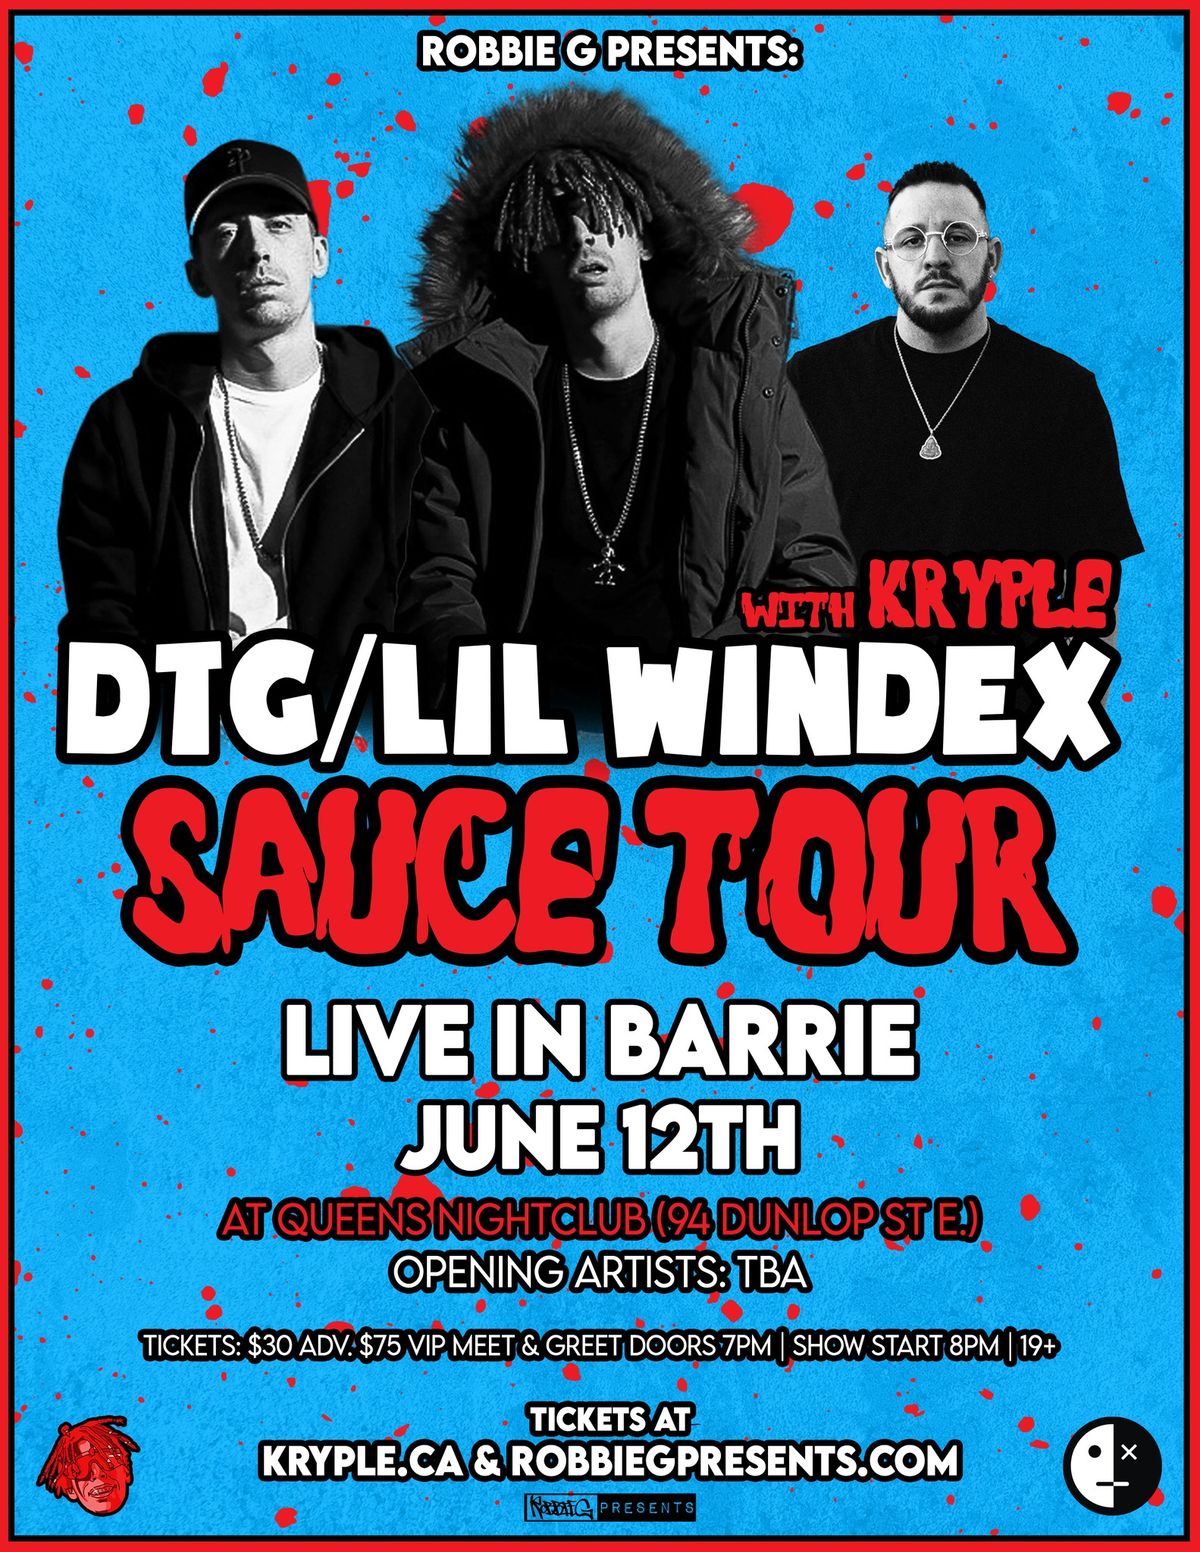 DTG\/Lil Windex Live in Barrie June 12th at Queens Nightclub with Kryple